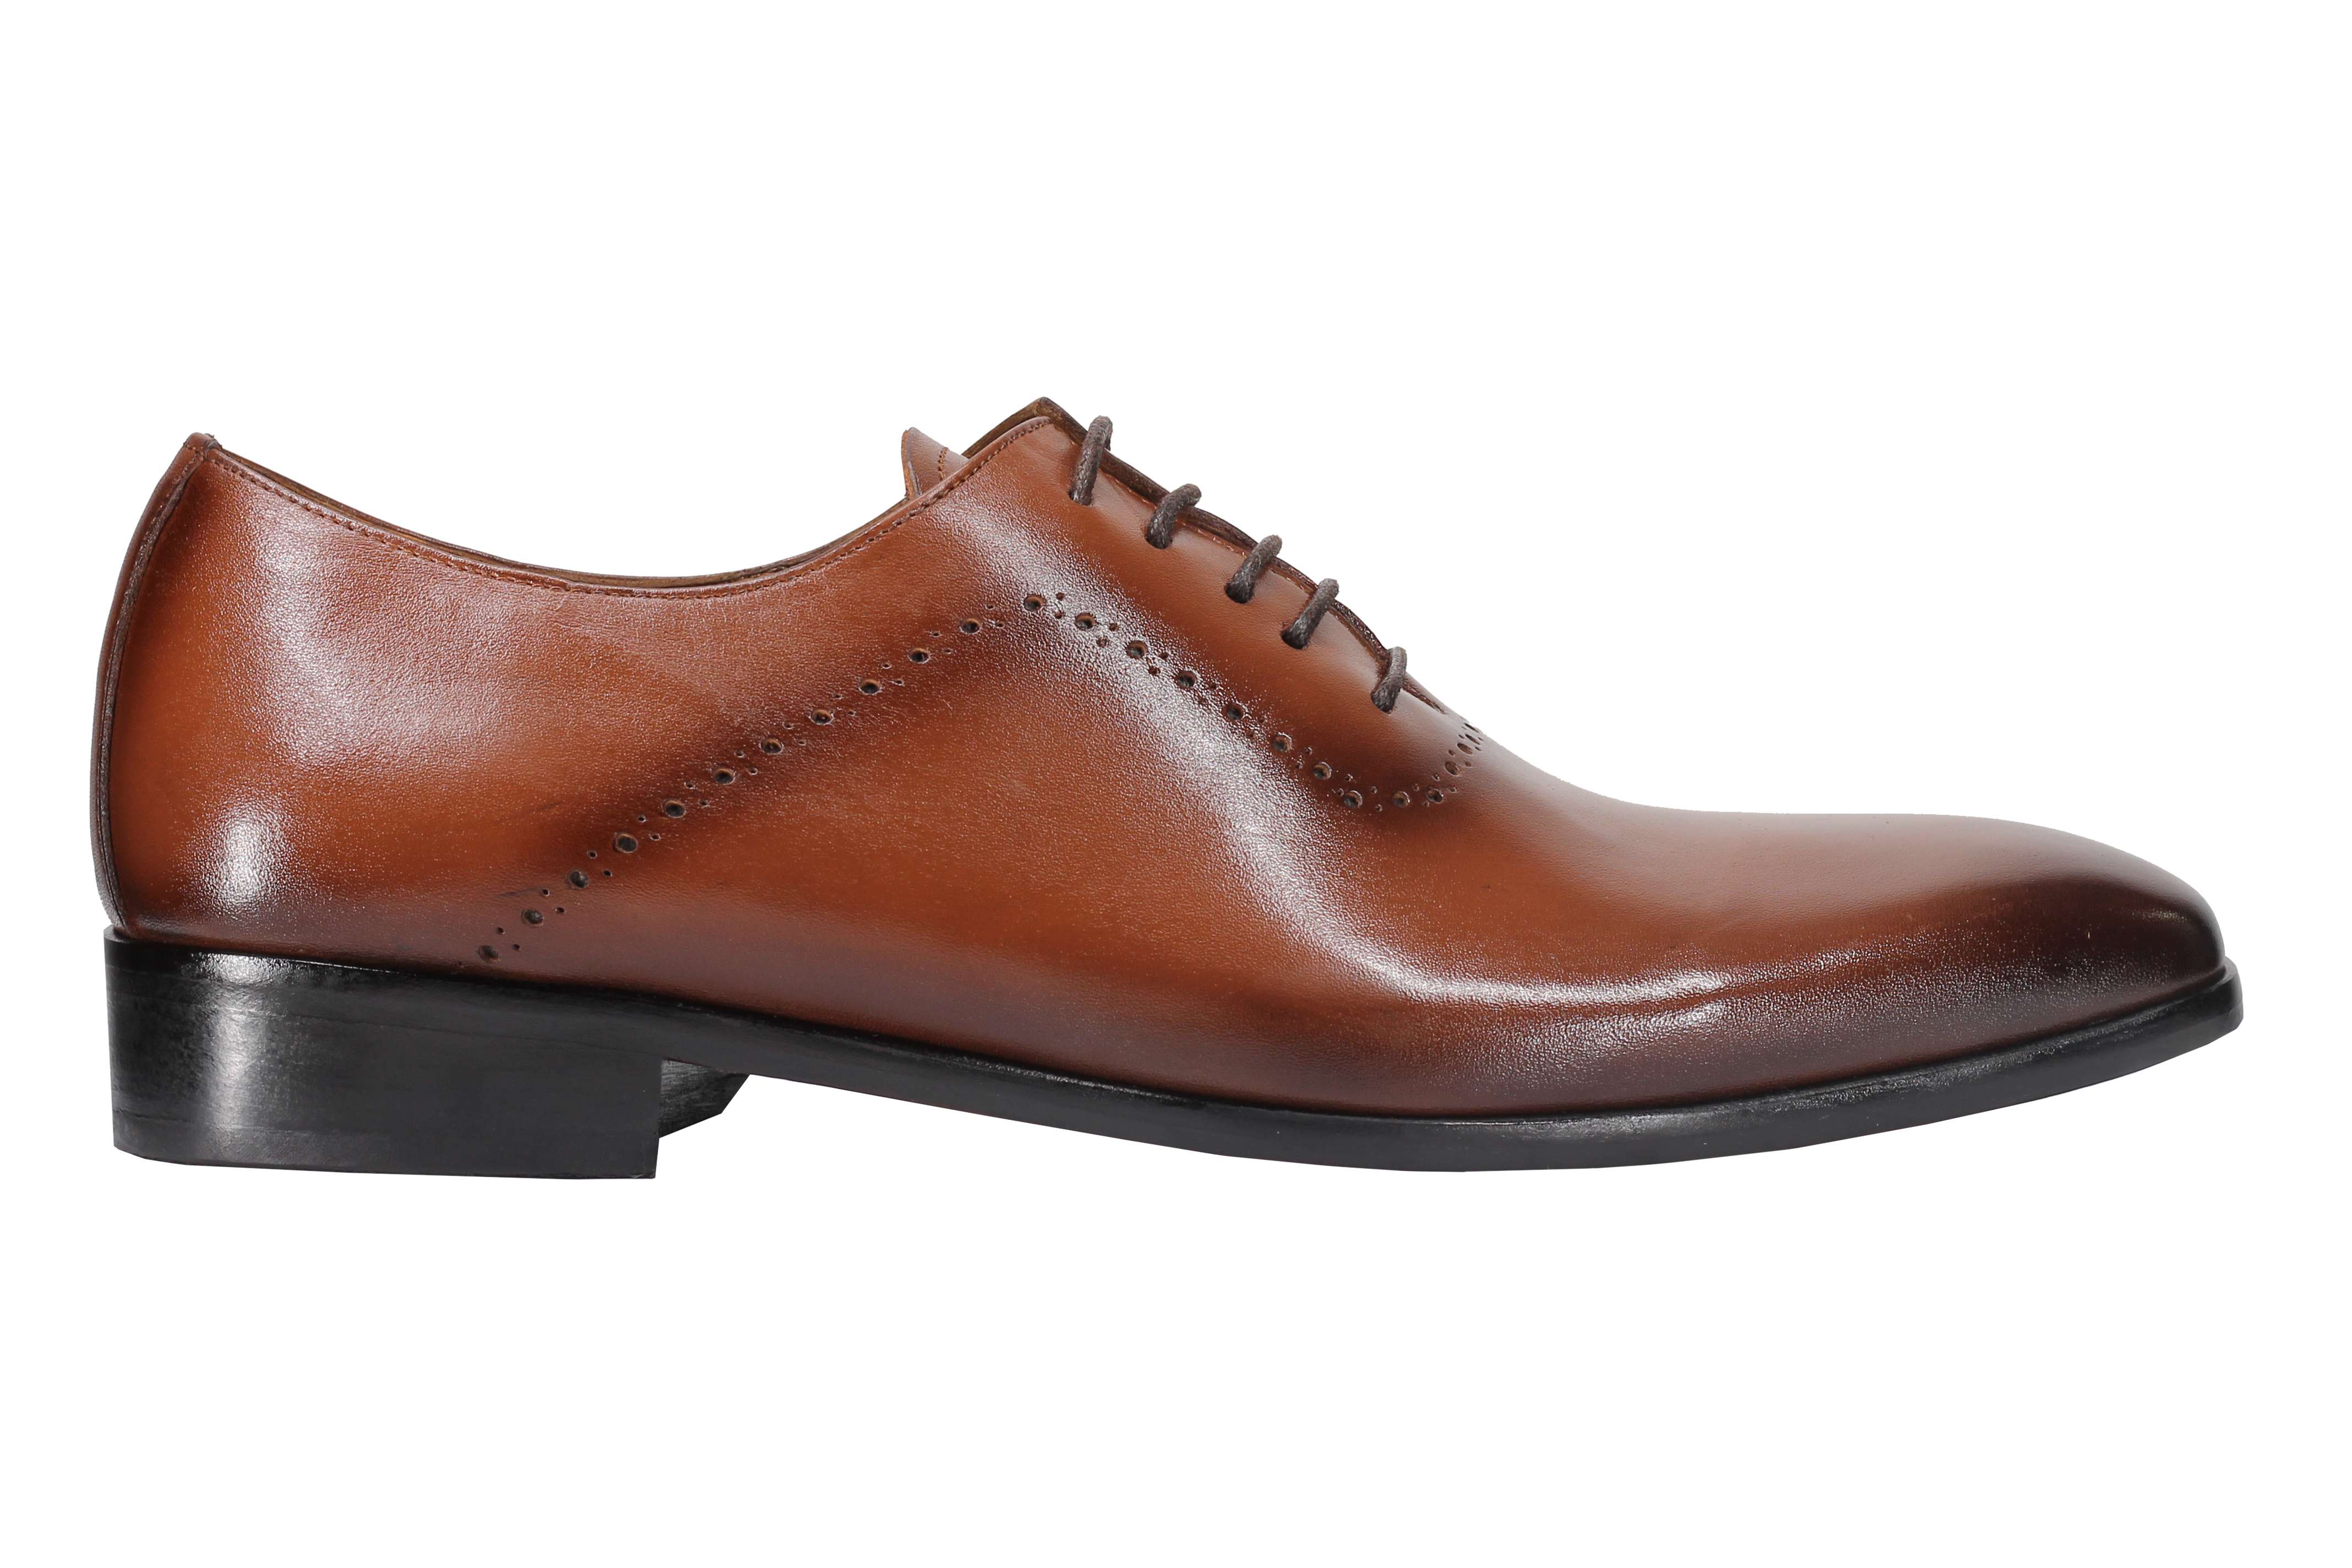 BROWN CALF LEATHER OXFORD LACE UP BROGUE SHOES